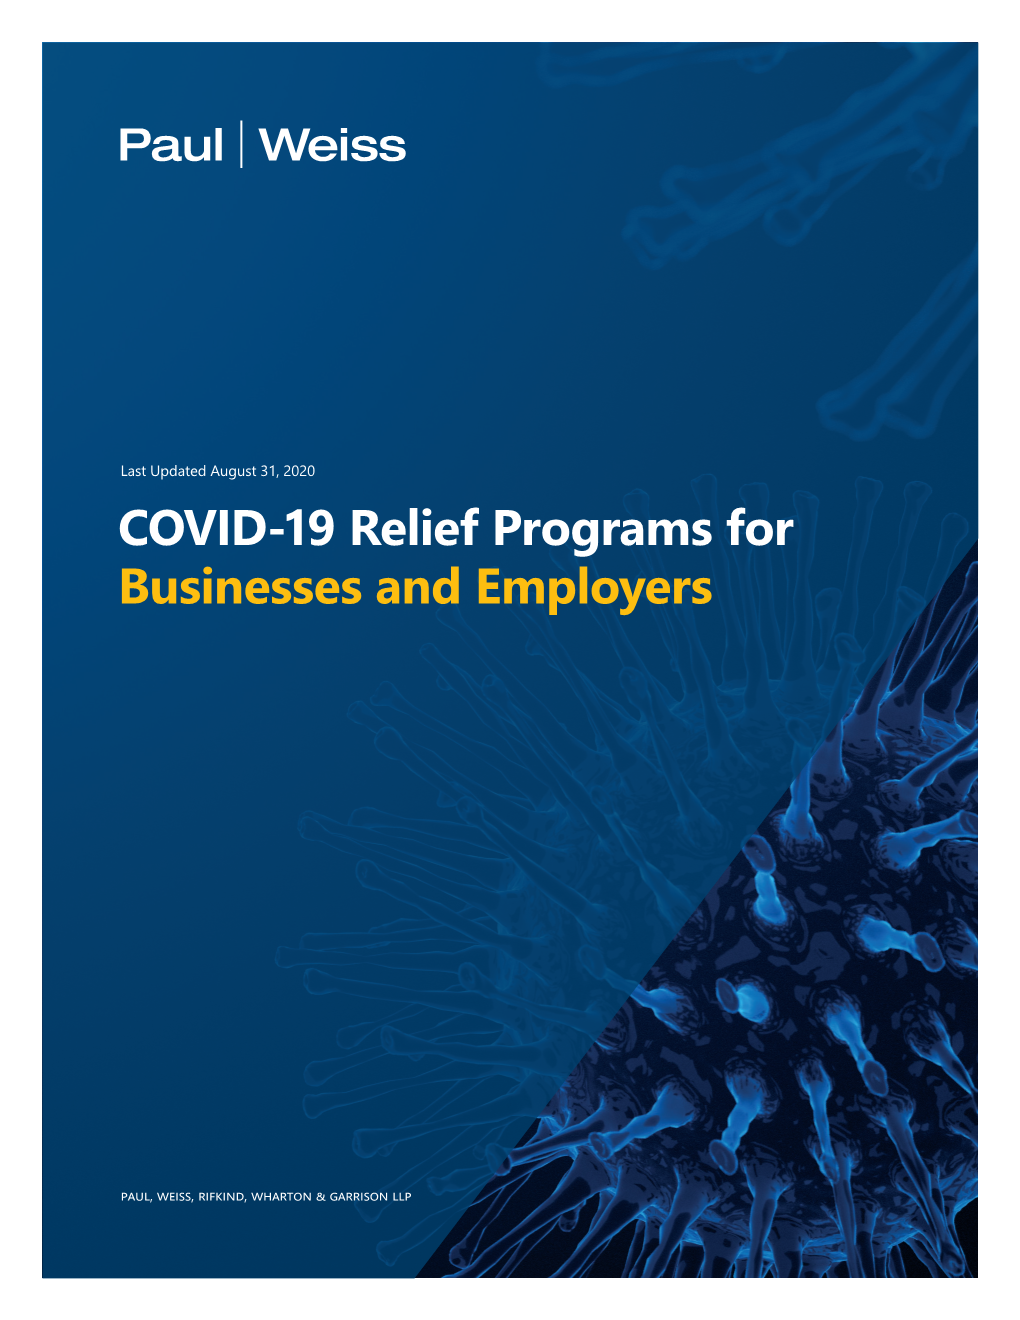 COVID-19 Relief Programs for Businesses and Employers